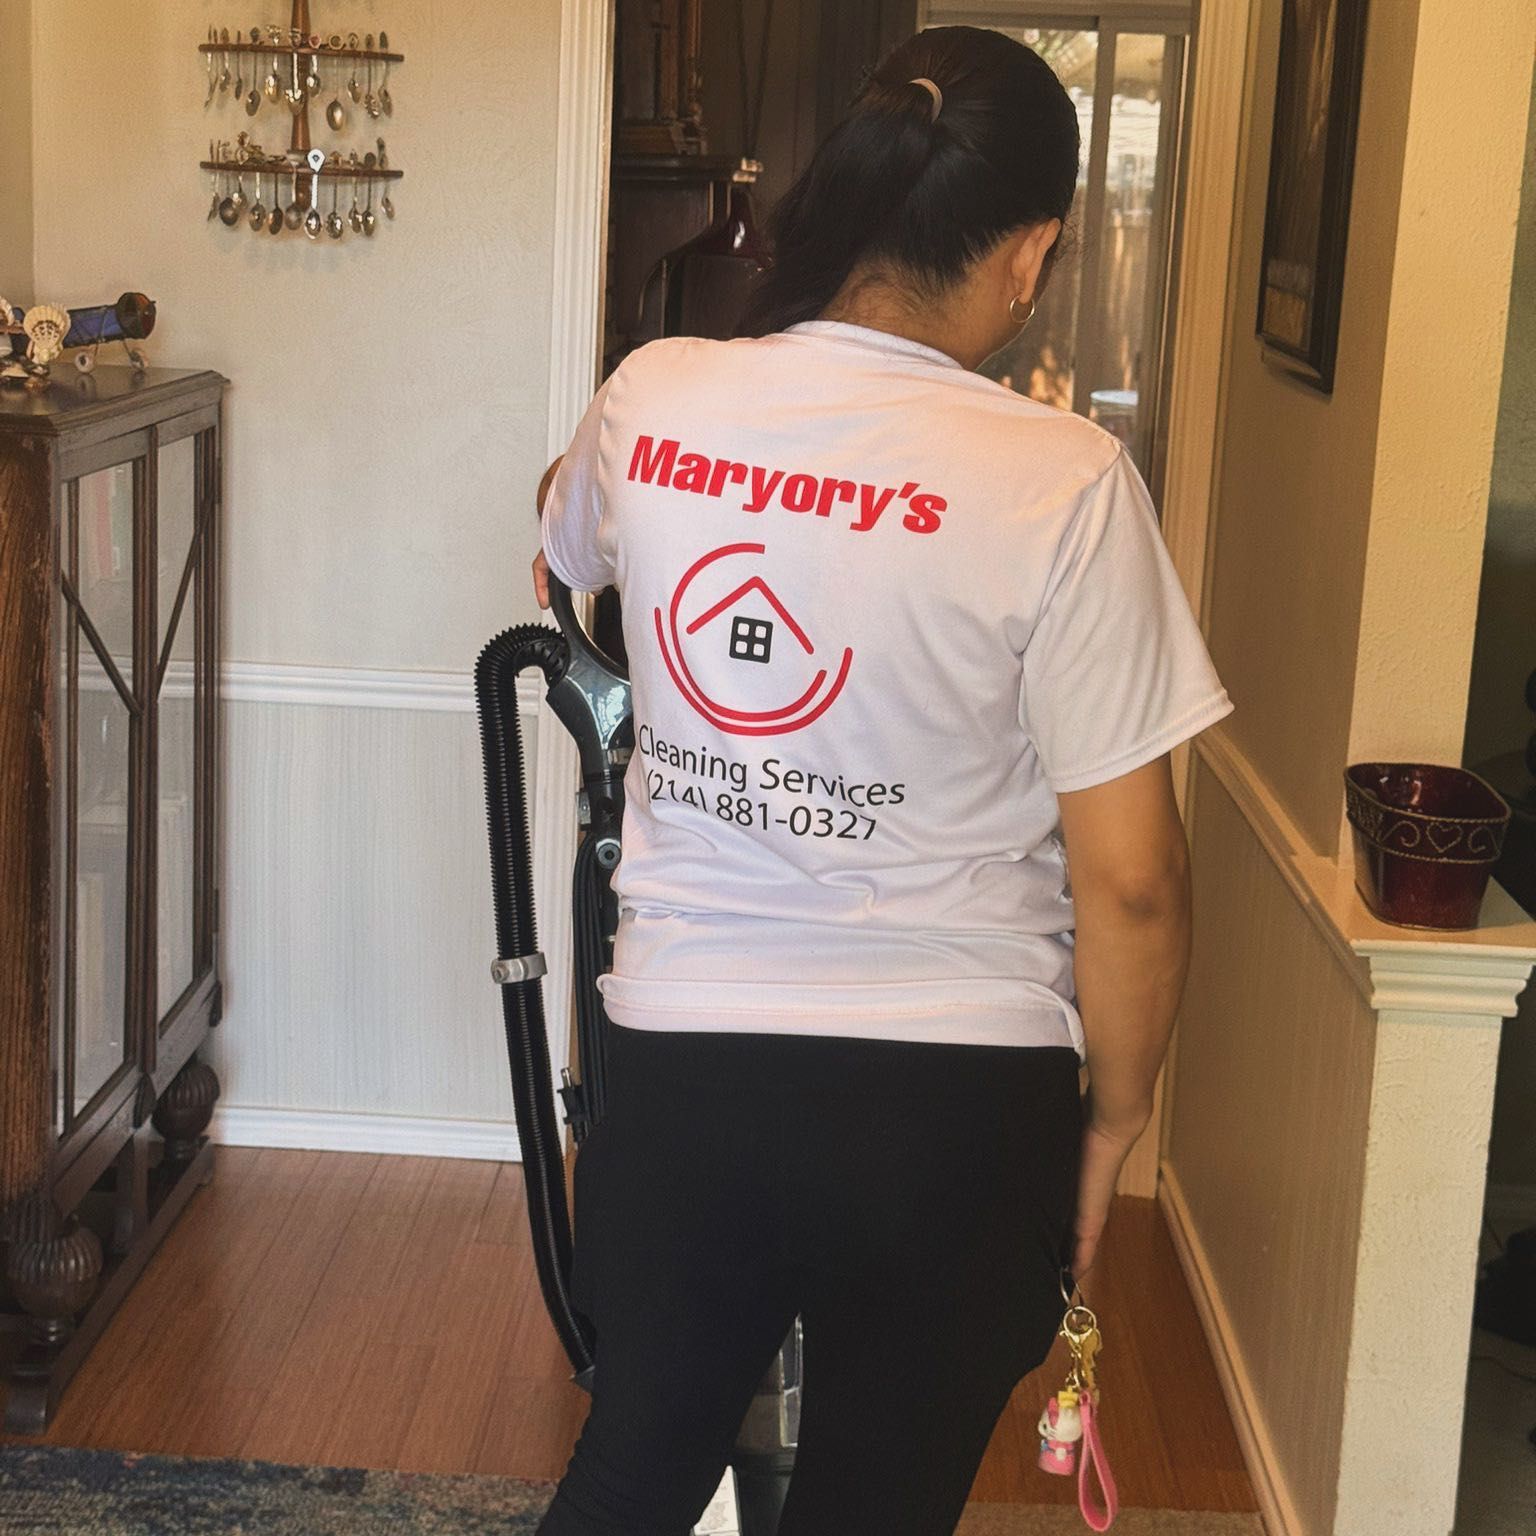 Maryory’s Cleaning Service, 3626 Hilltop Ln, Plano, 75023